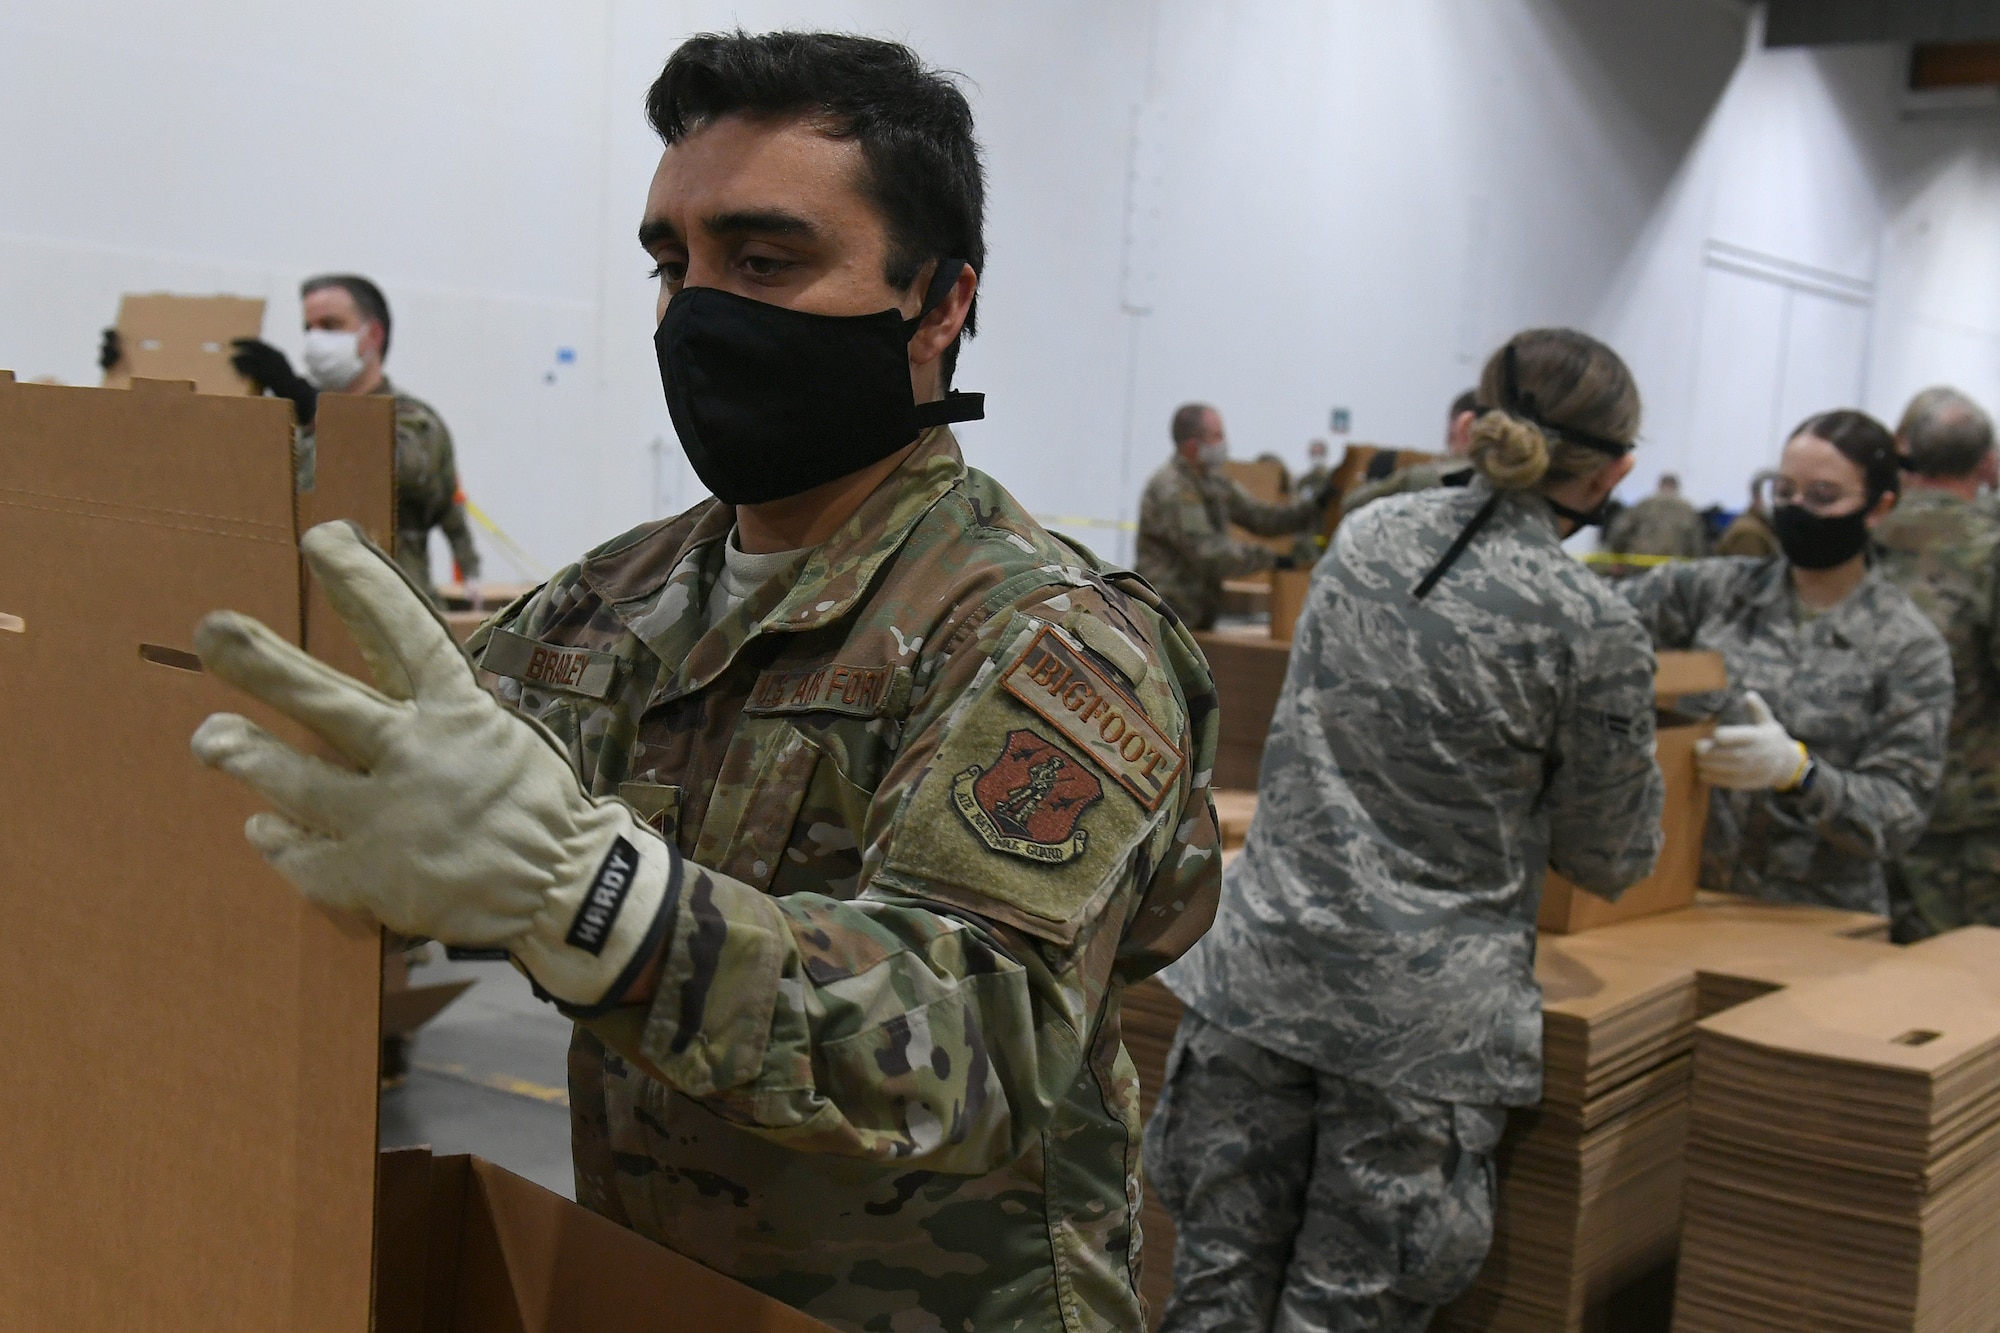 U.S. Air Force Staff Sgt. Matthew Bradley, assigned to the 225th Air Defense Squadron, prepares food boxes at the Food Lifeline COVID Response warehouse April 23, 2020, in Seattle, Washington.  More than 250 Air and National Guardsmen are assigned to the warehouse where they are able to prepare, on average, 268 boxes an hour per line. (U.S. Air National Guard photo by Master Sgt. Tim Chacon)